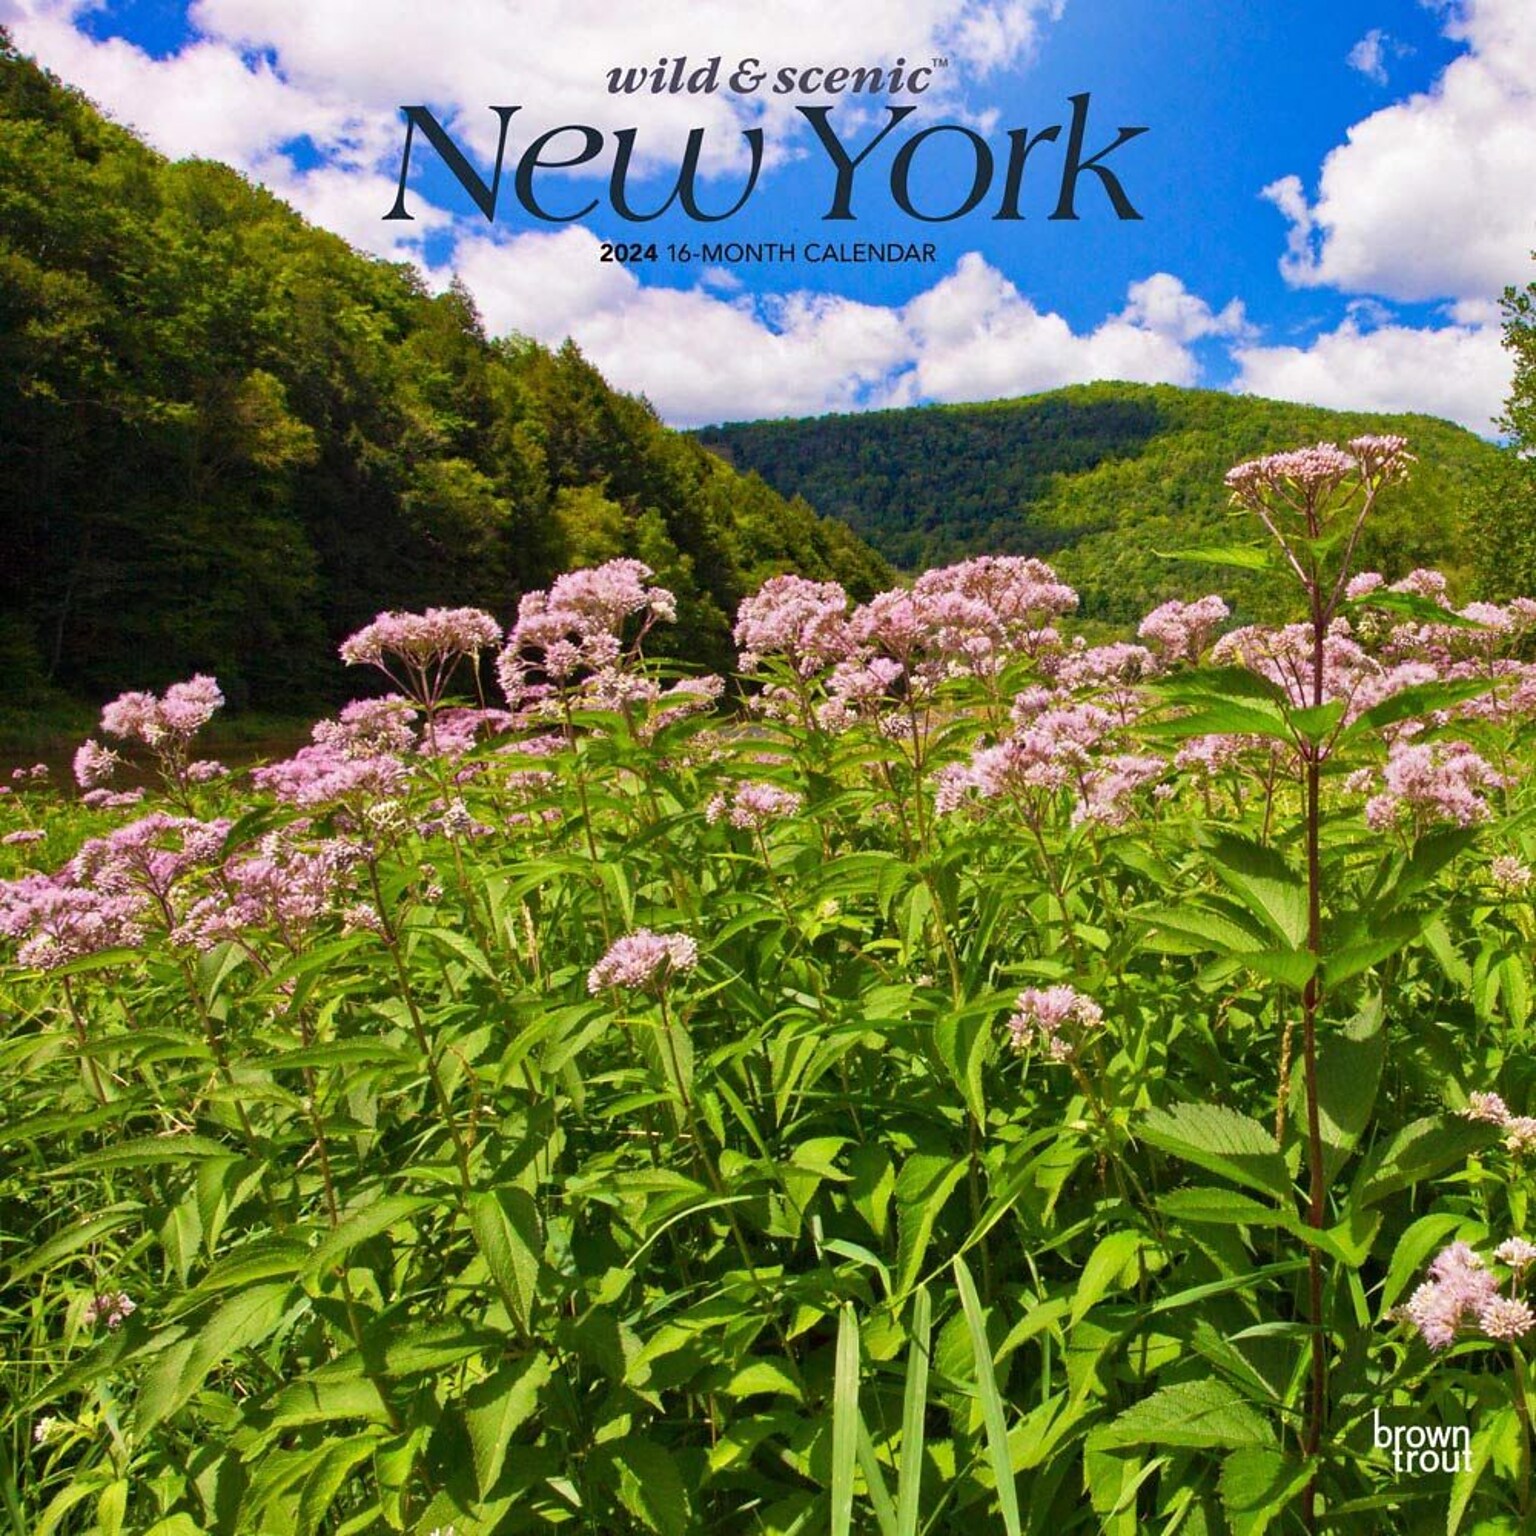 2024 BrownTrout New York Wild & Scenic 12 x 24 Monthly Wall Calendar (9781975464288)